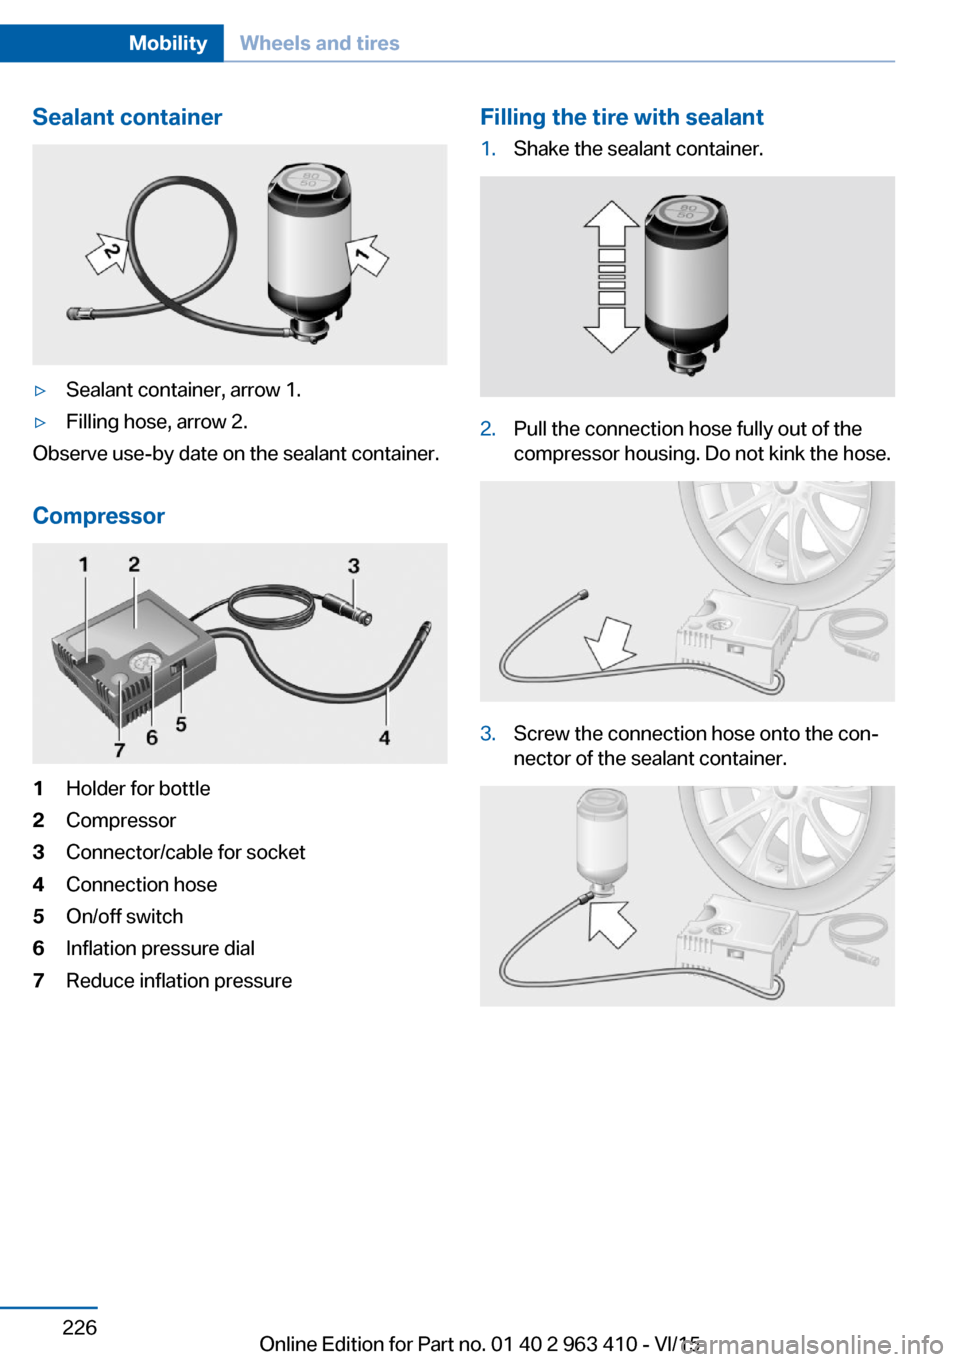 BMW X5 2015 F15 User Guide Sealant container▷Sealant container, arrow 1.▷Filling hose, arrow 2.
Observe use-by date on the sealant container.
Compressor
1Holder for bottle2Compressor3Connector/cable for socket4Connection ho